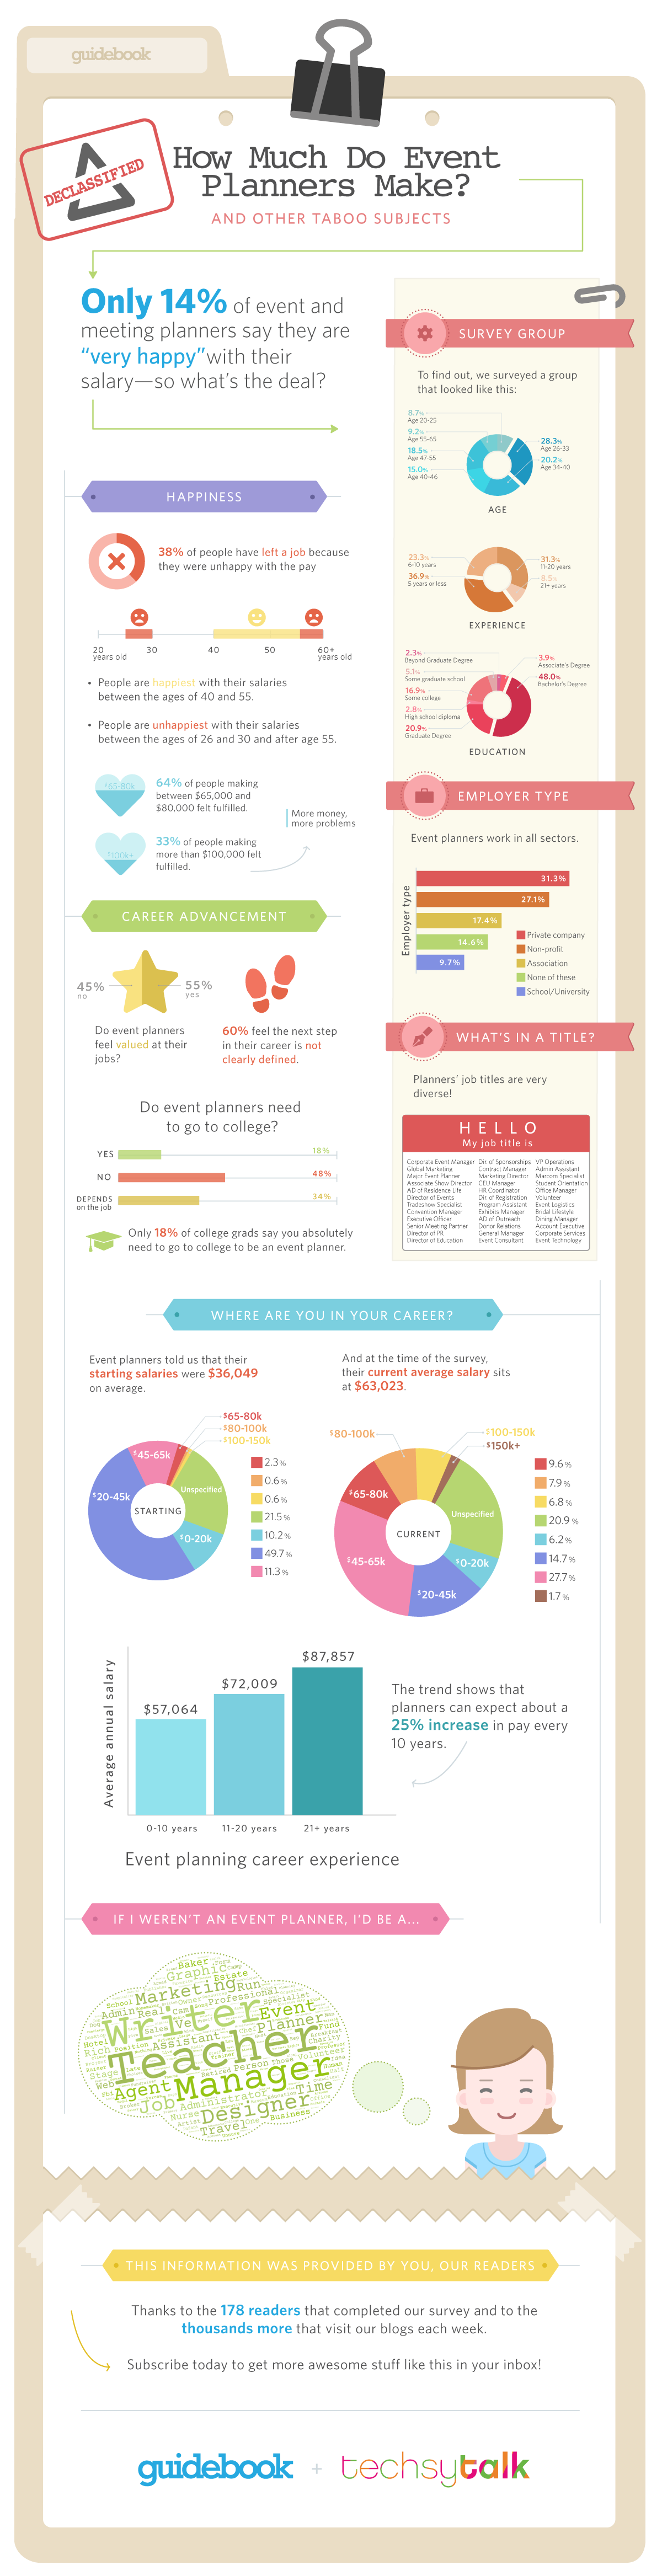 guidebook techsytalk event planner salary infographic